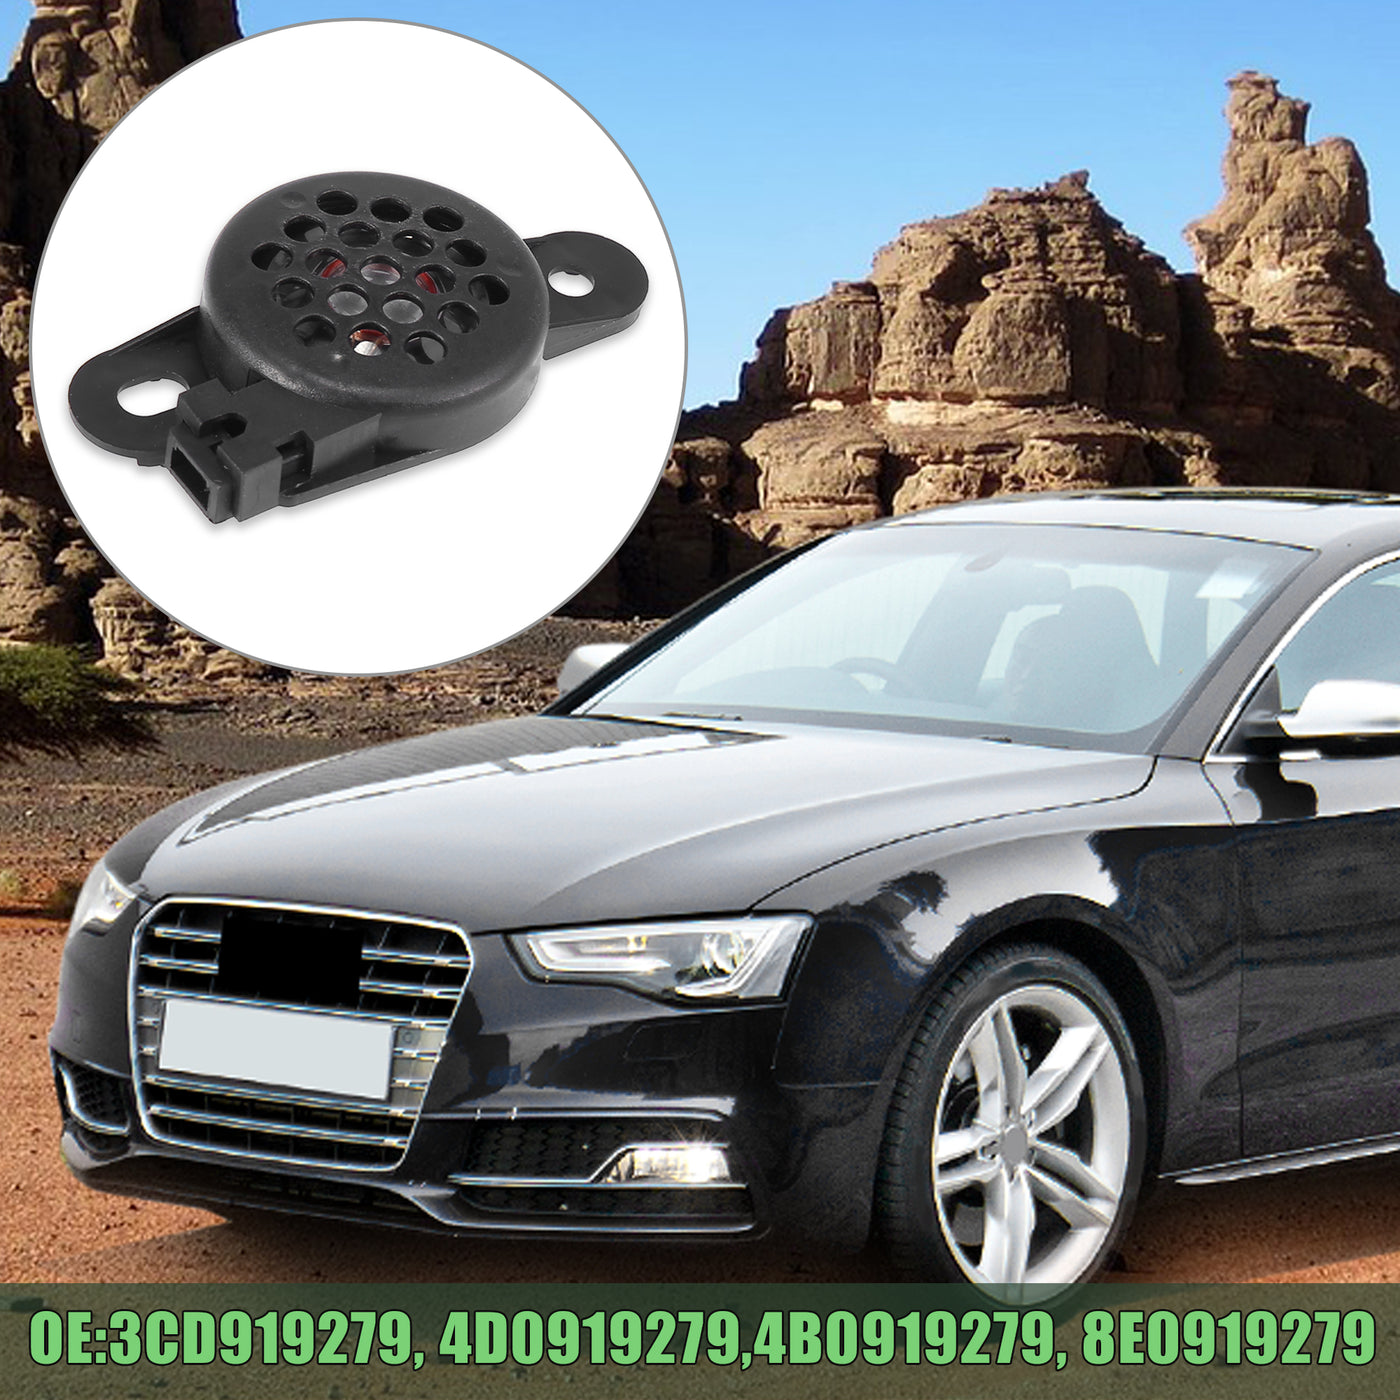 X AUTOHAUX Car Warning Buzzer 8E0919279 PDC Reverse Parking Aid for Skoda for Seat for Audi 8E0 919 279 4B0 919 279 4D0 919 279 3C0 919 279.